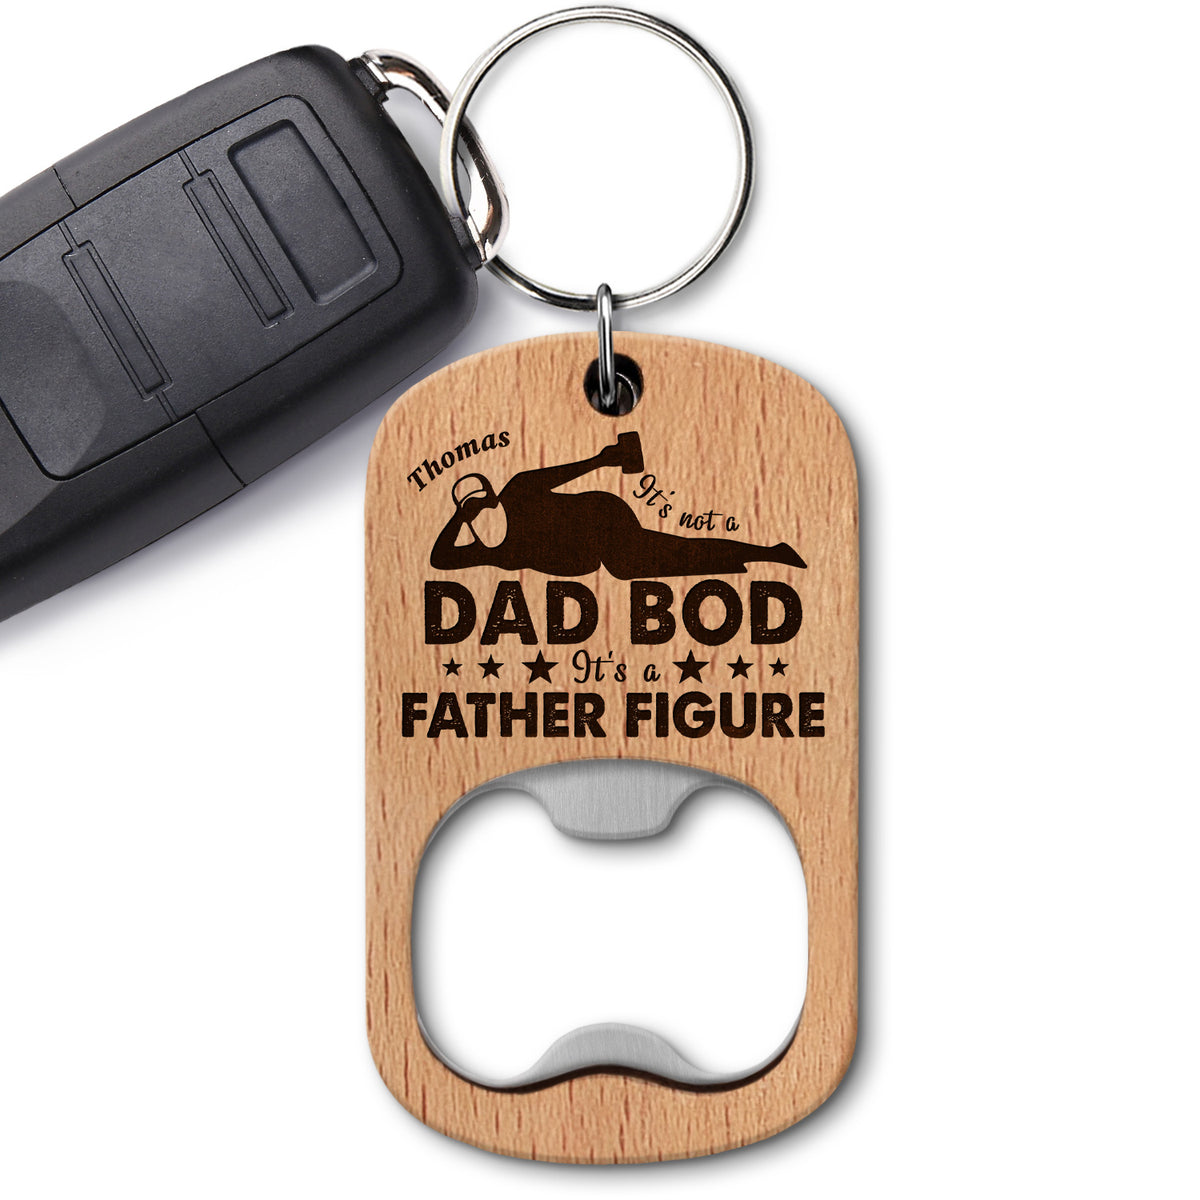 Discover It's Not A Dad Bod - Gift For Father, Daddy, Papa, Uncle - Personalized Bottle Opener Keychain